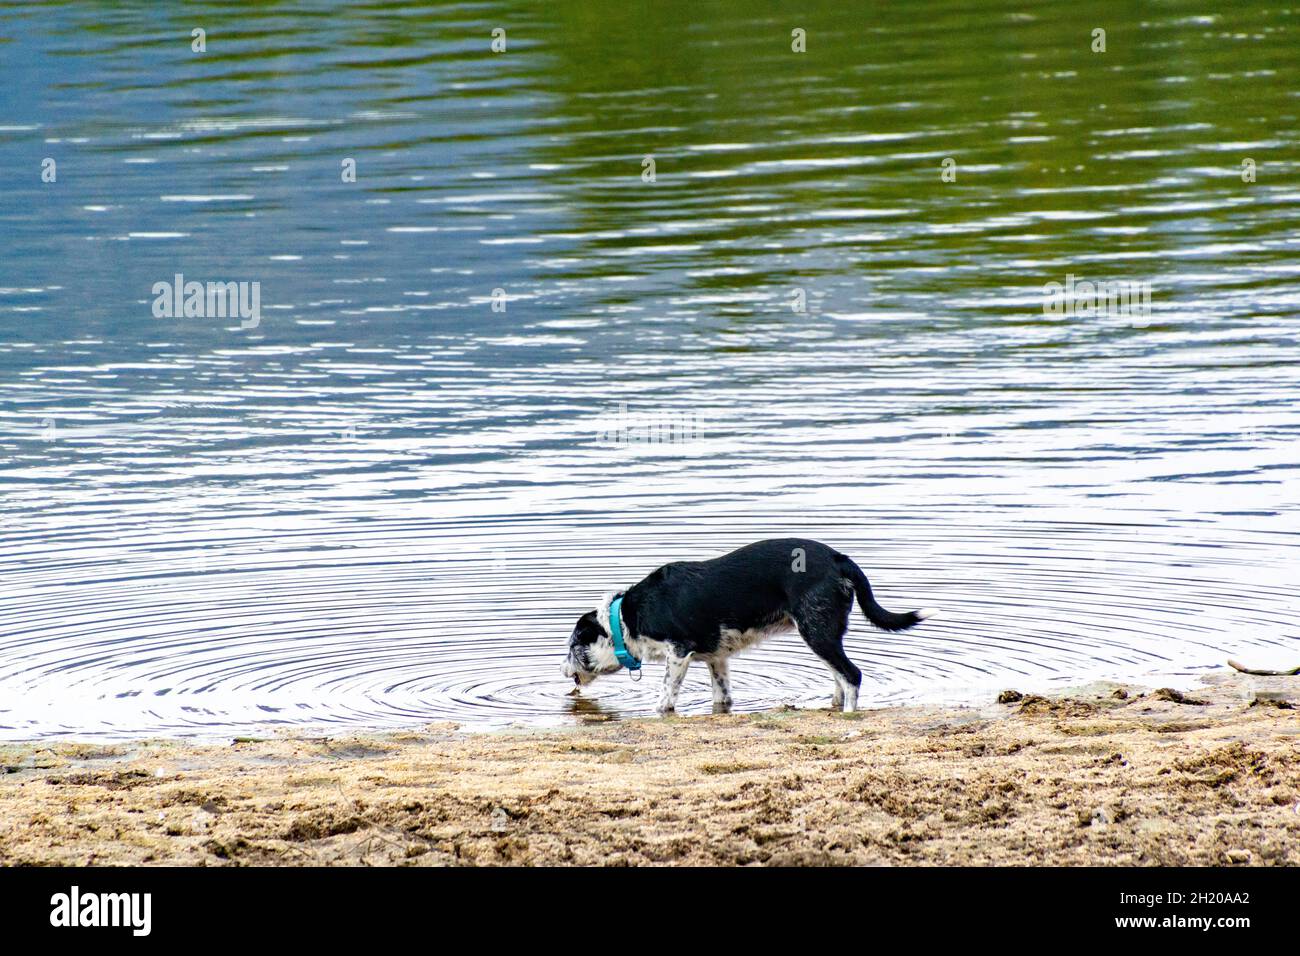 Dark dog drinking water from a reservoir in Segovia causing waves, in Castilla y León, in Spain. Europe. Horizontal photography. Stock Photo